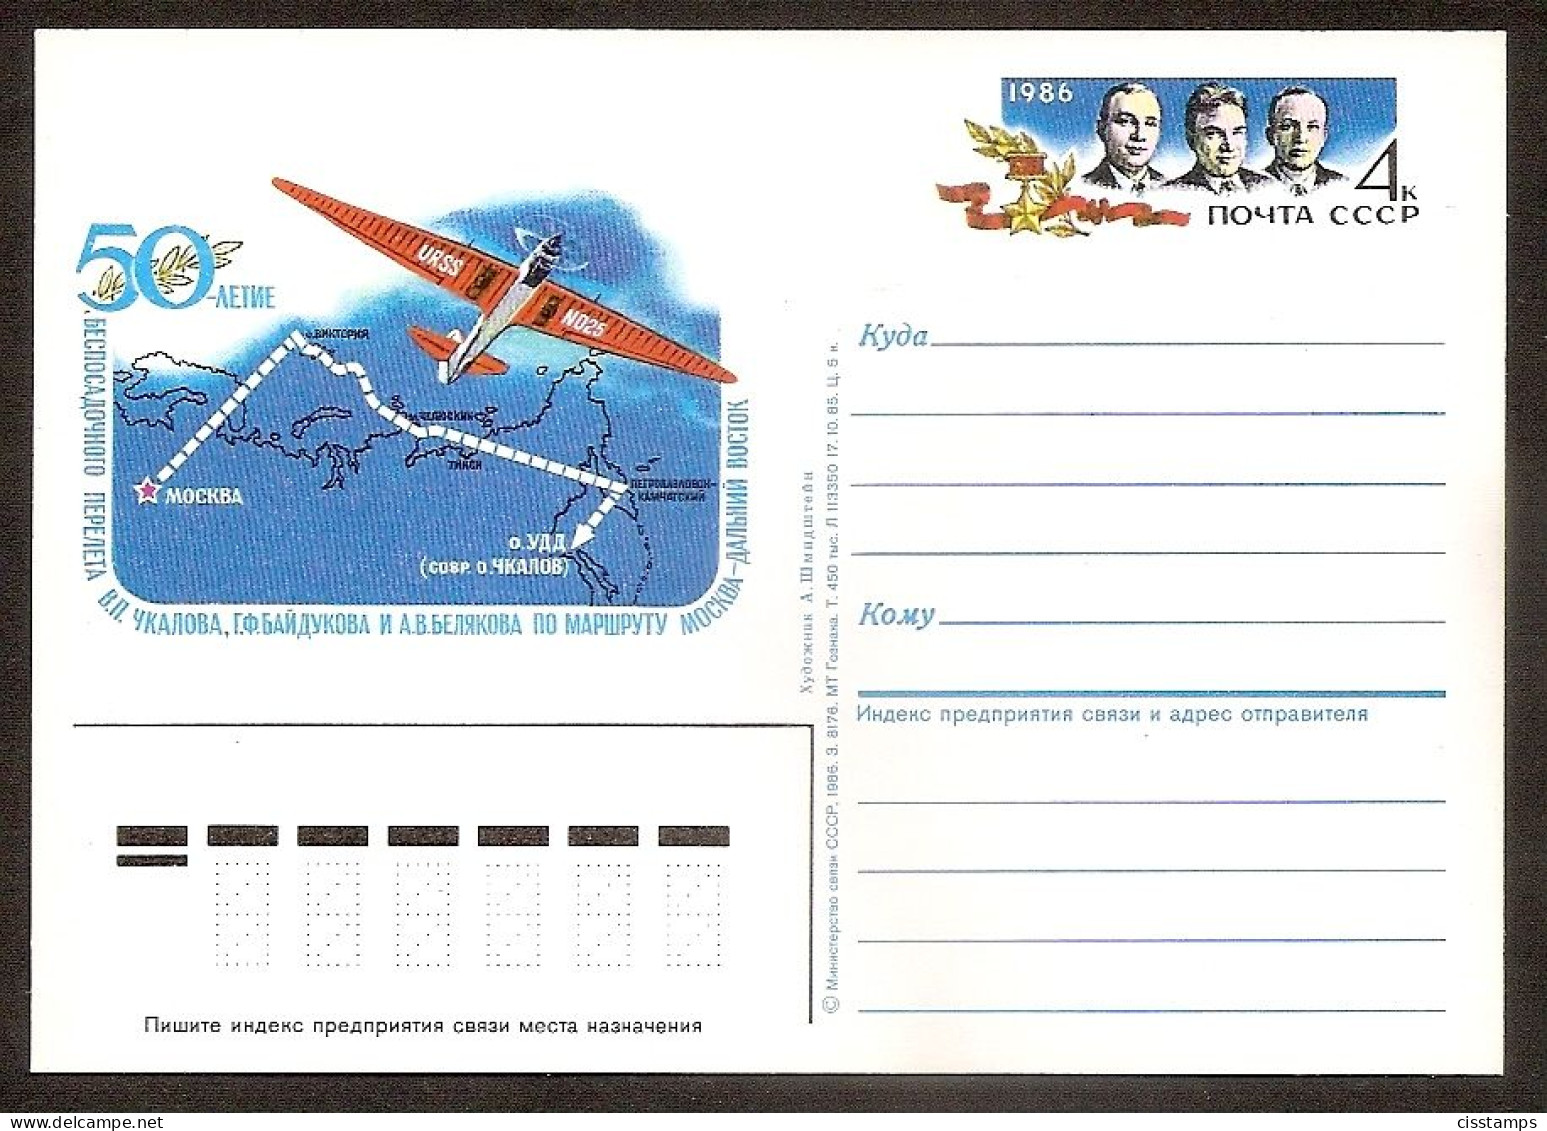 Russia USSR 1986●50th Anniv. Non Stop Flight Moscow-Far East●Airplane●●stamped Stationery●postal Card●Mi PSo158 - 1980-91